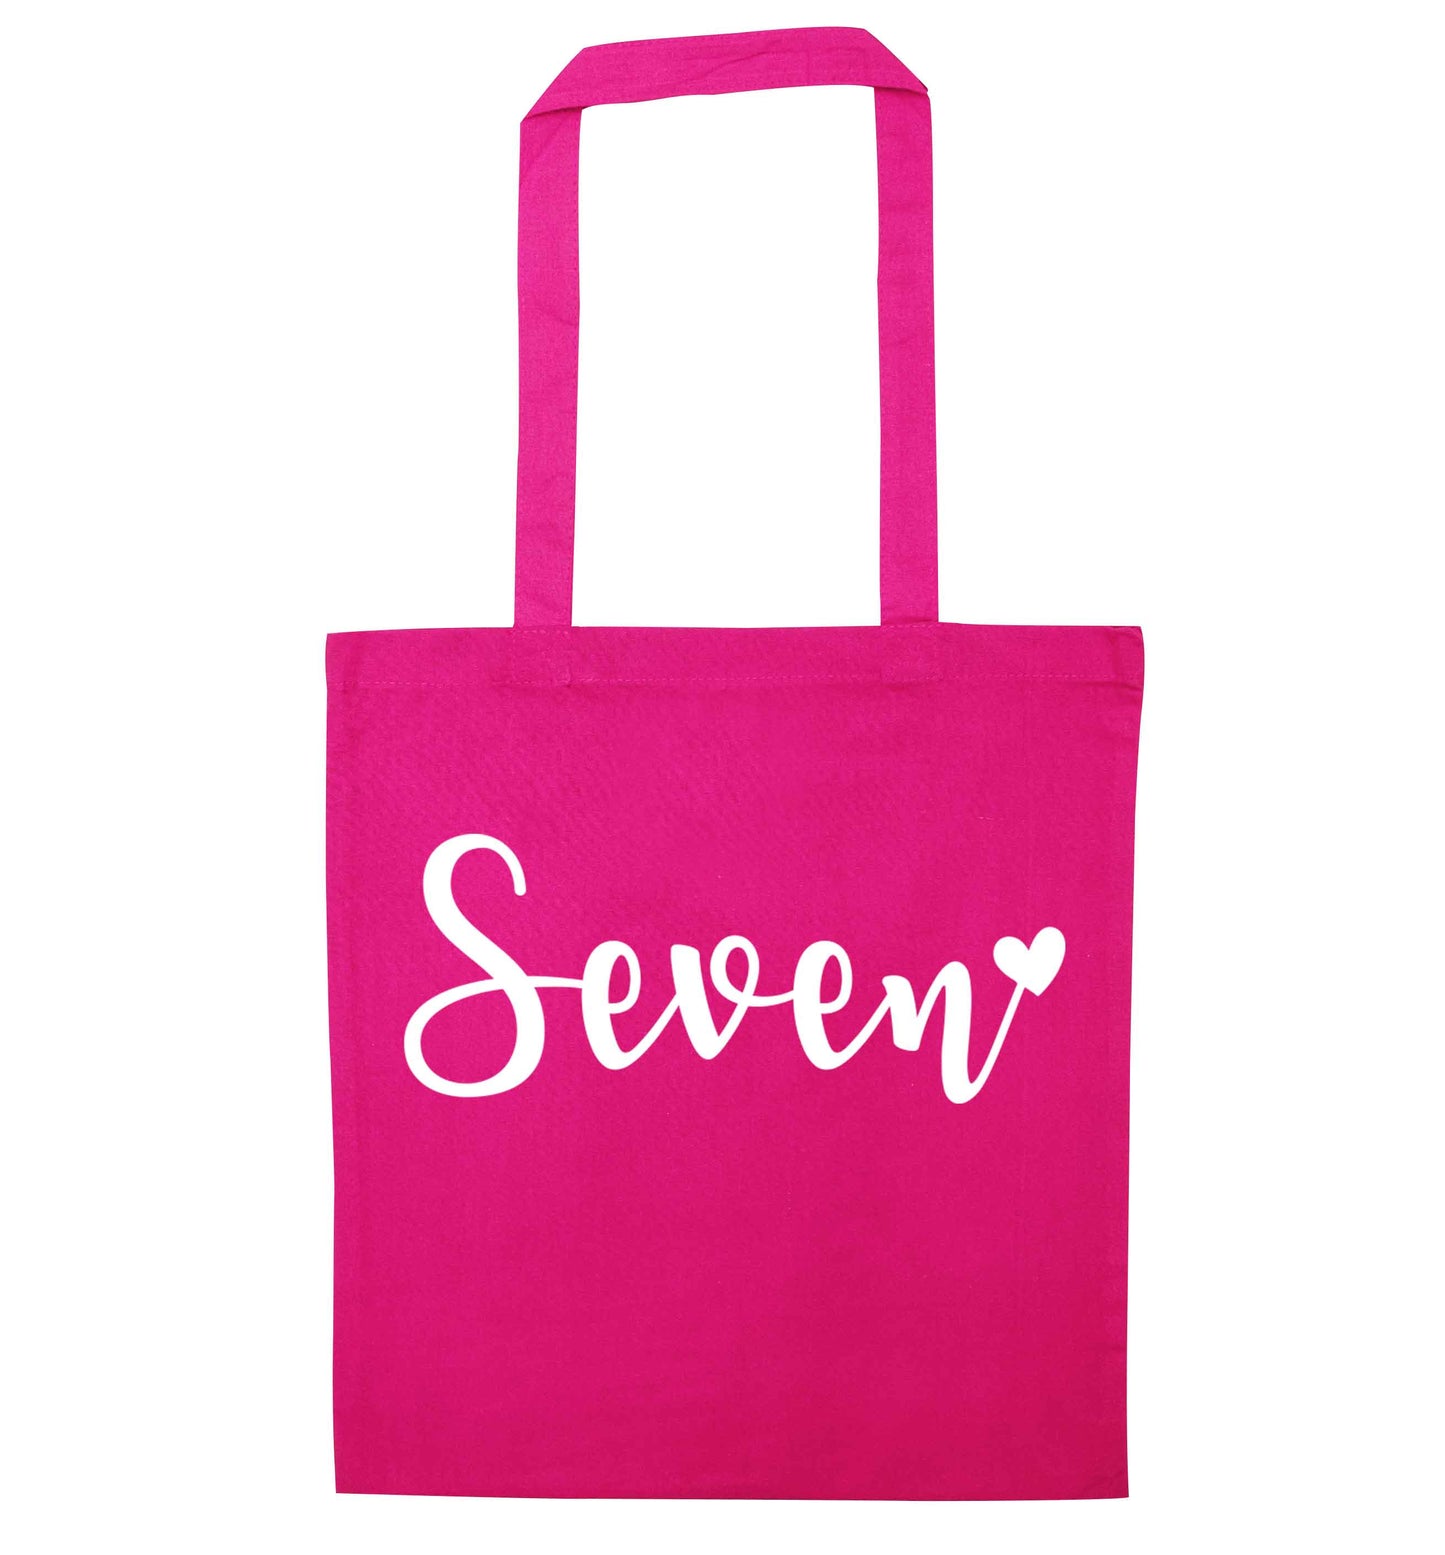 Seven and heart pink tote bag